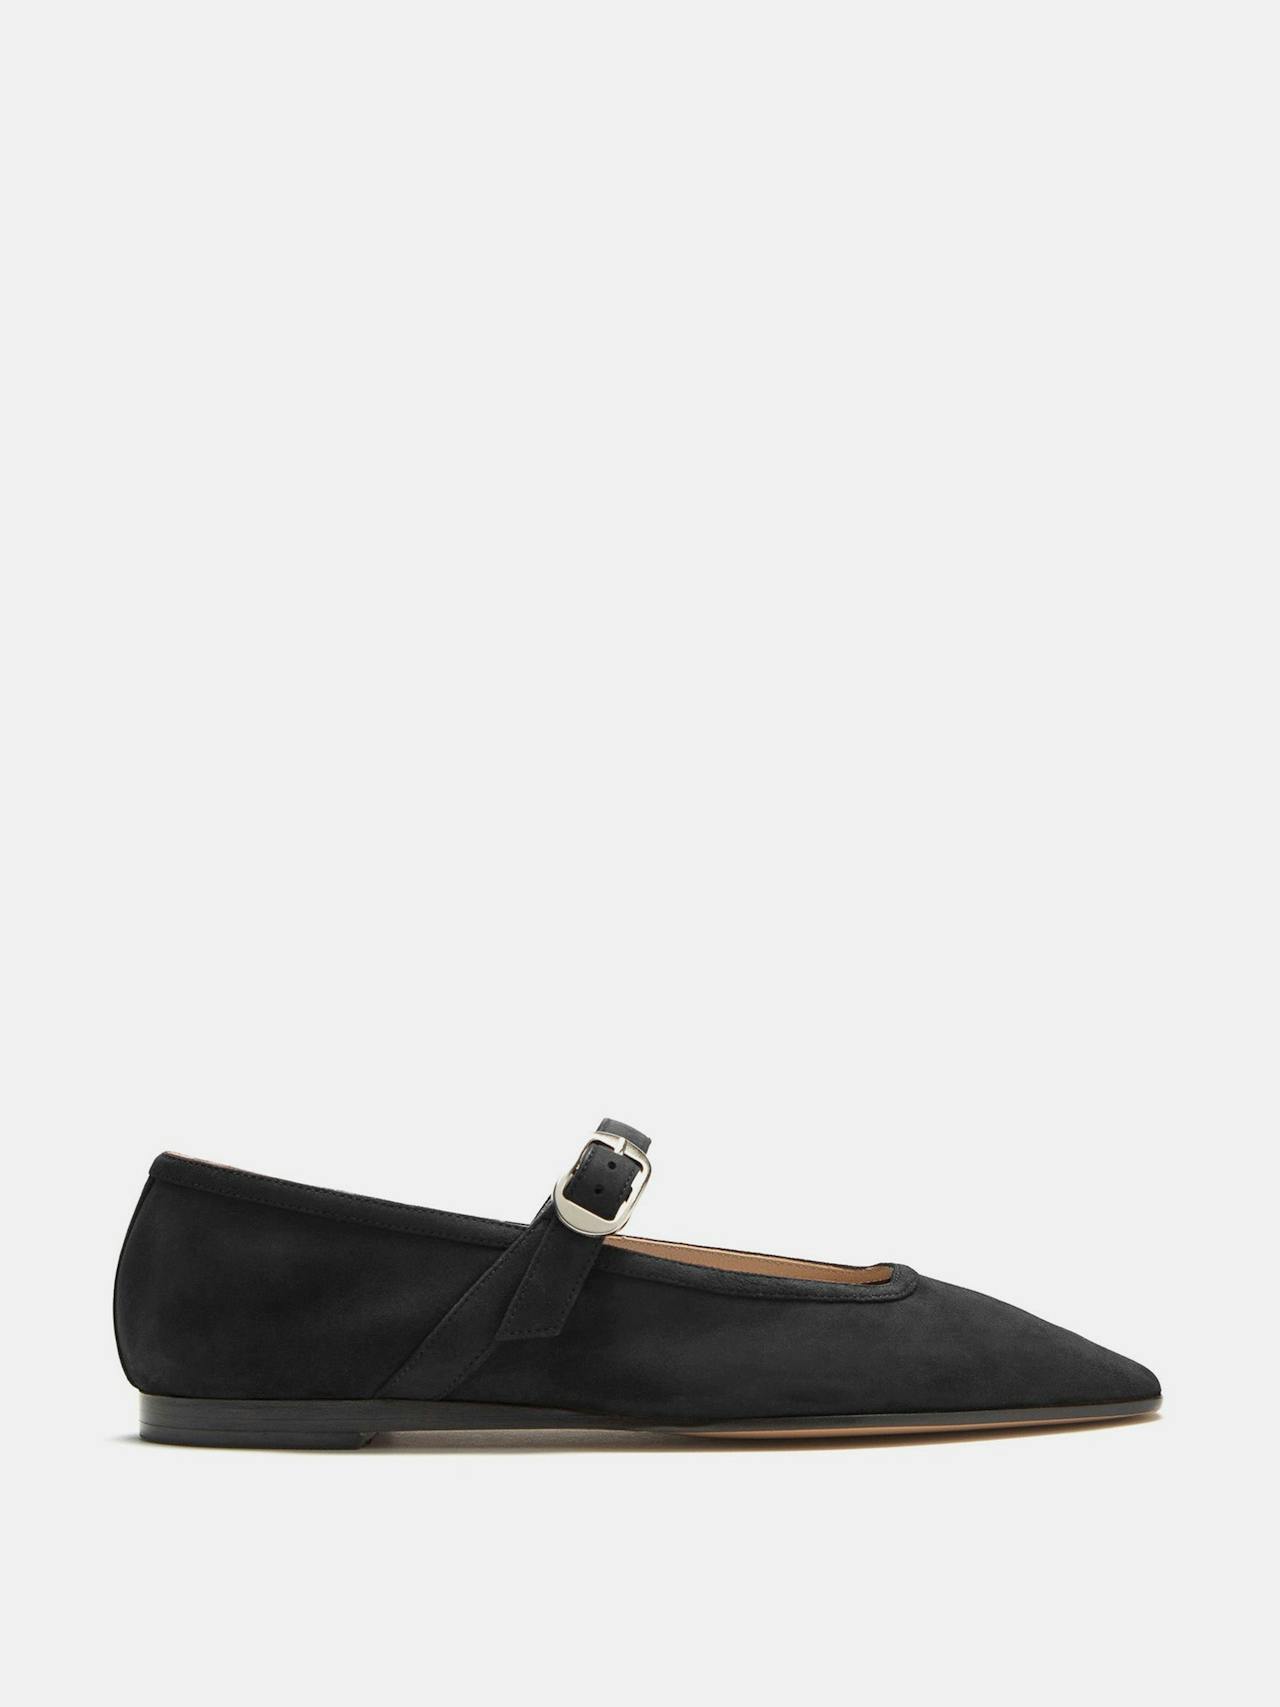 Black suede ballet Mary Jane flats